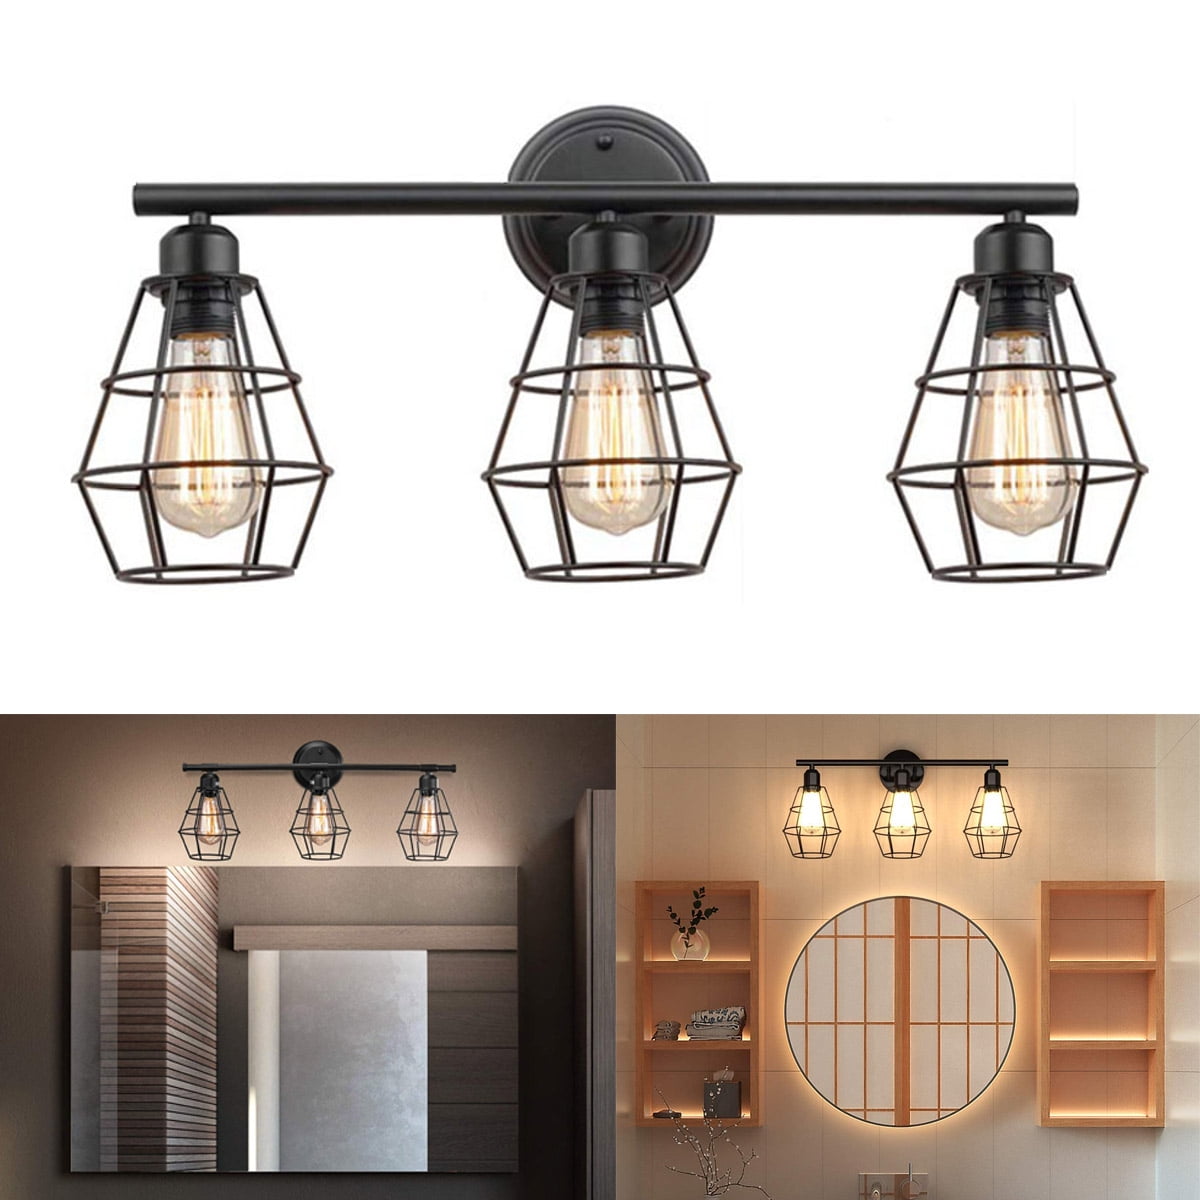 Details about   Modern Industrial Vanity Lighting Loft 3 Lamp Cages Wall Sconce Lamps Fixture 